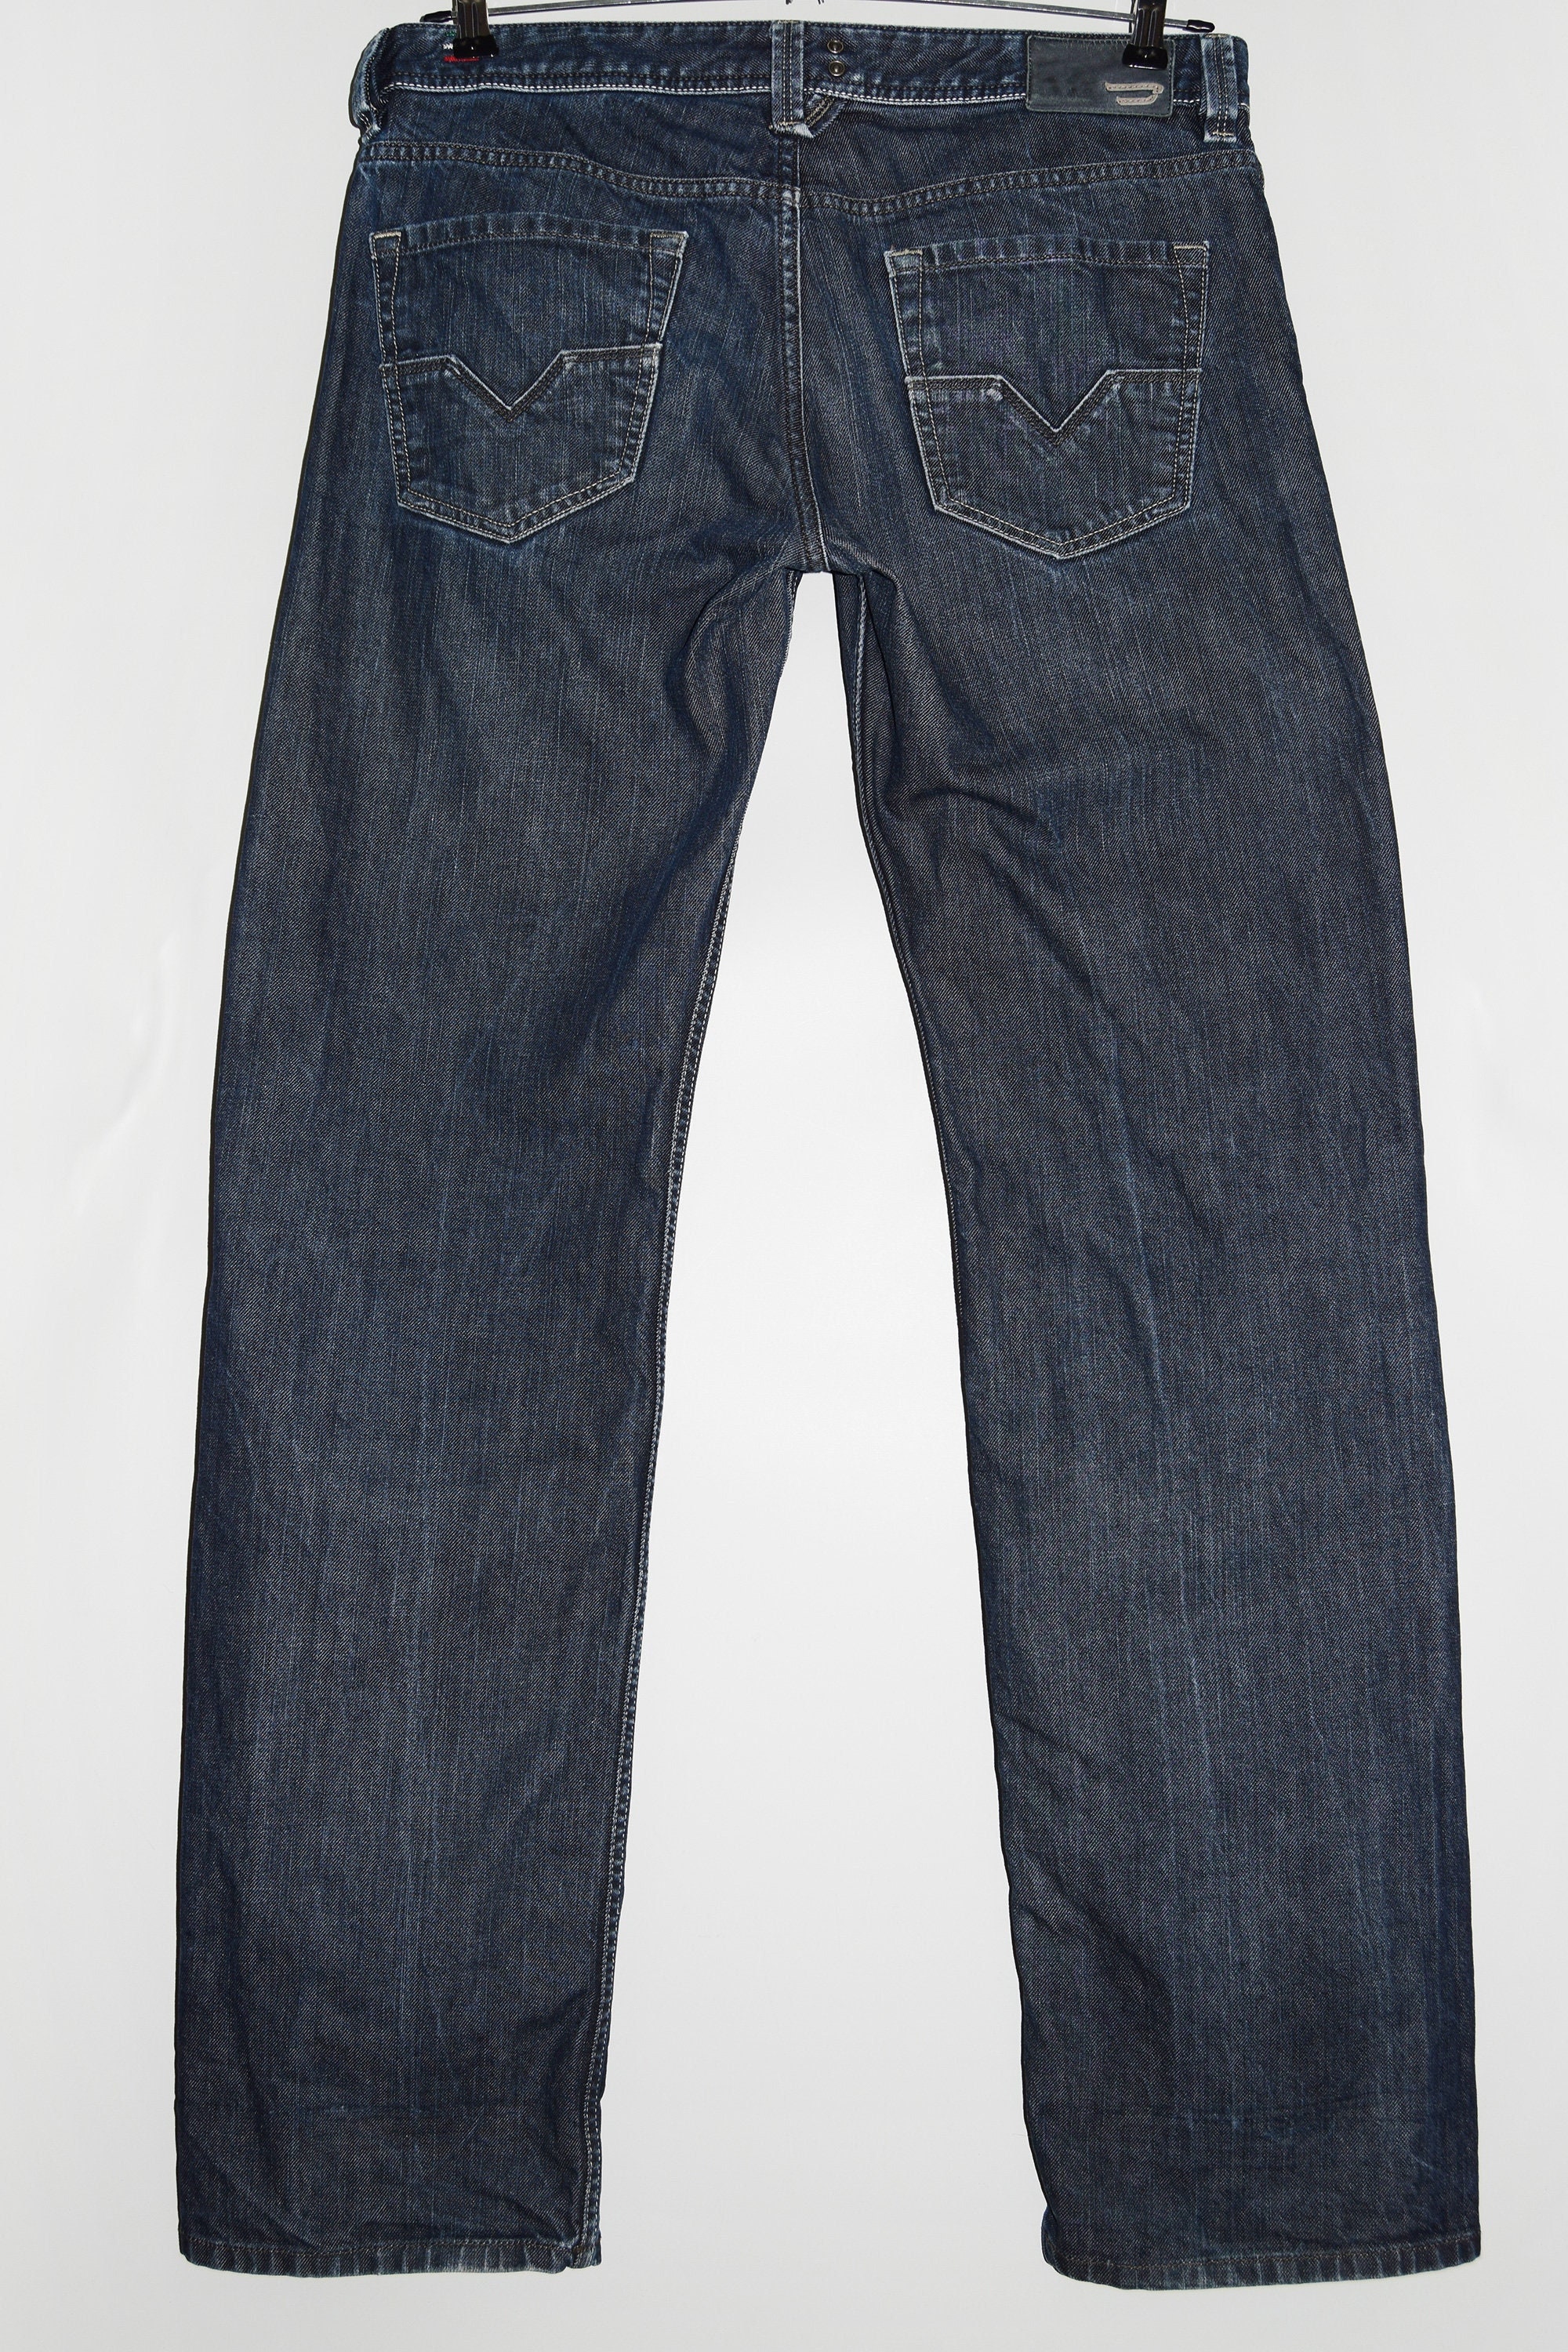 spin Stat pendul Diesel Larkee Jeans / Made in Italy - Etsy